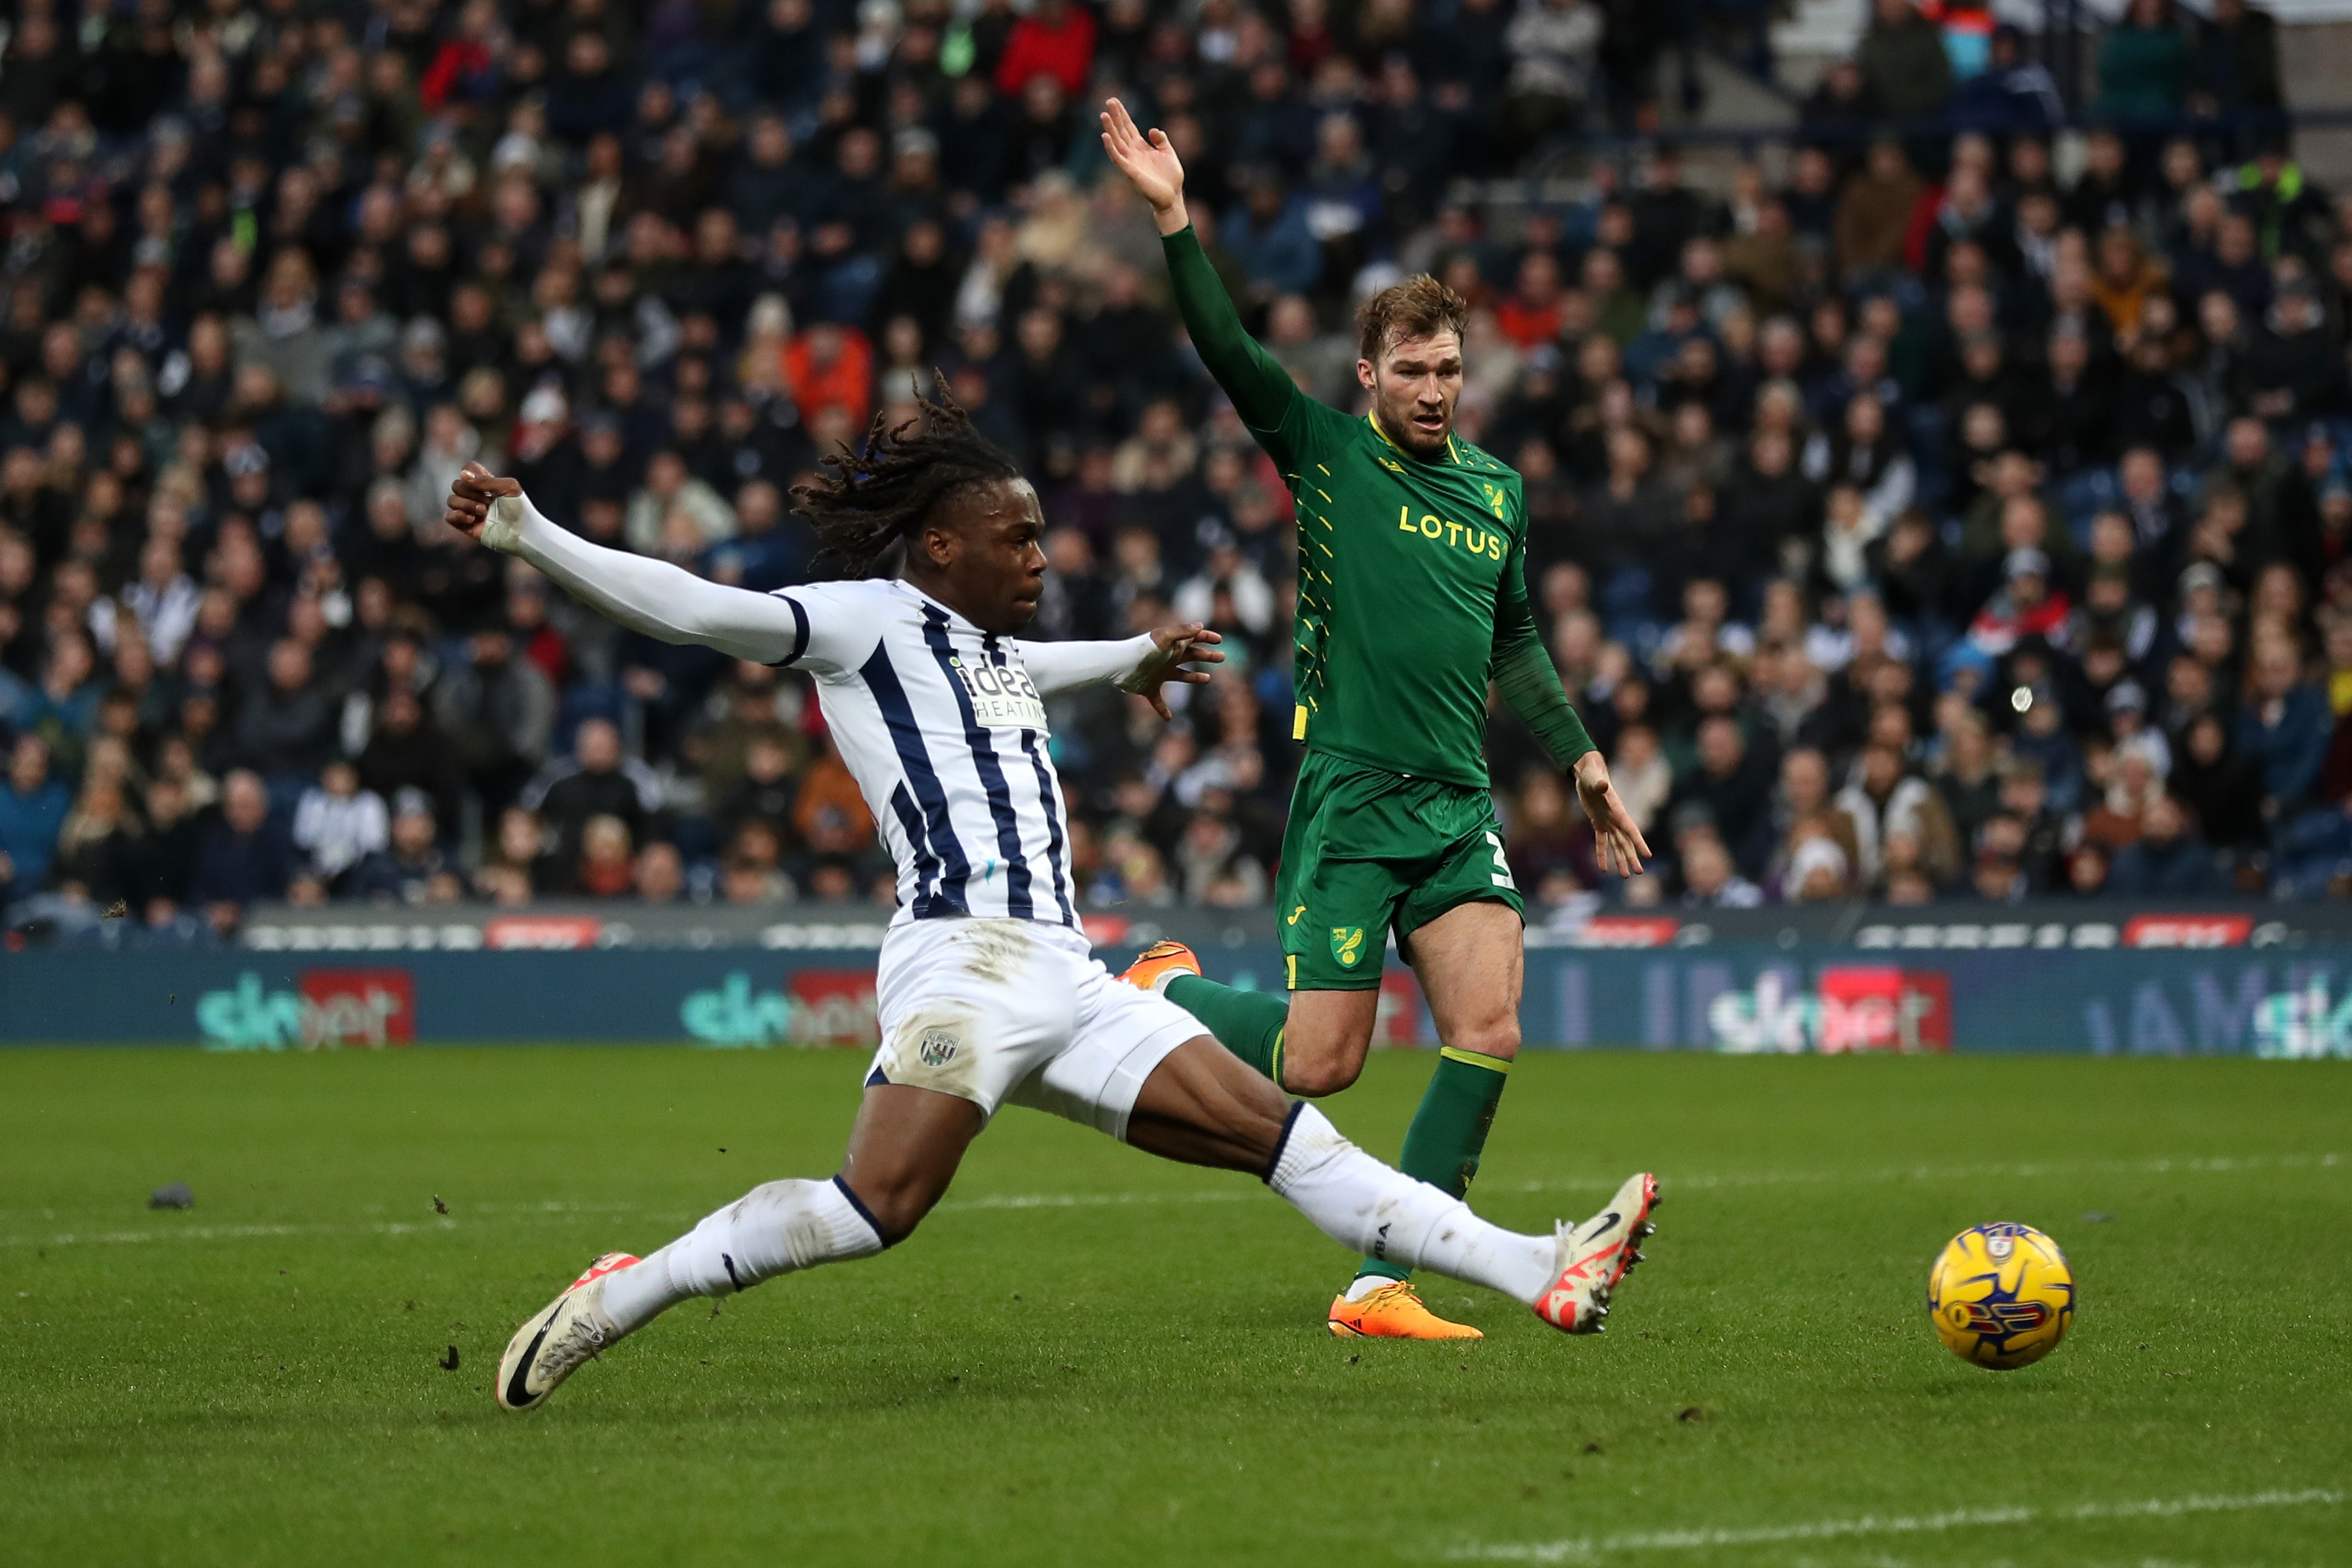 Brandon Thomas-Asante stretches for the ball against Norwich